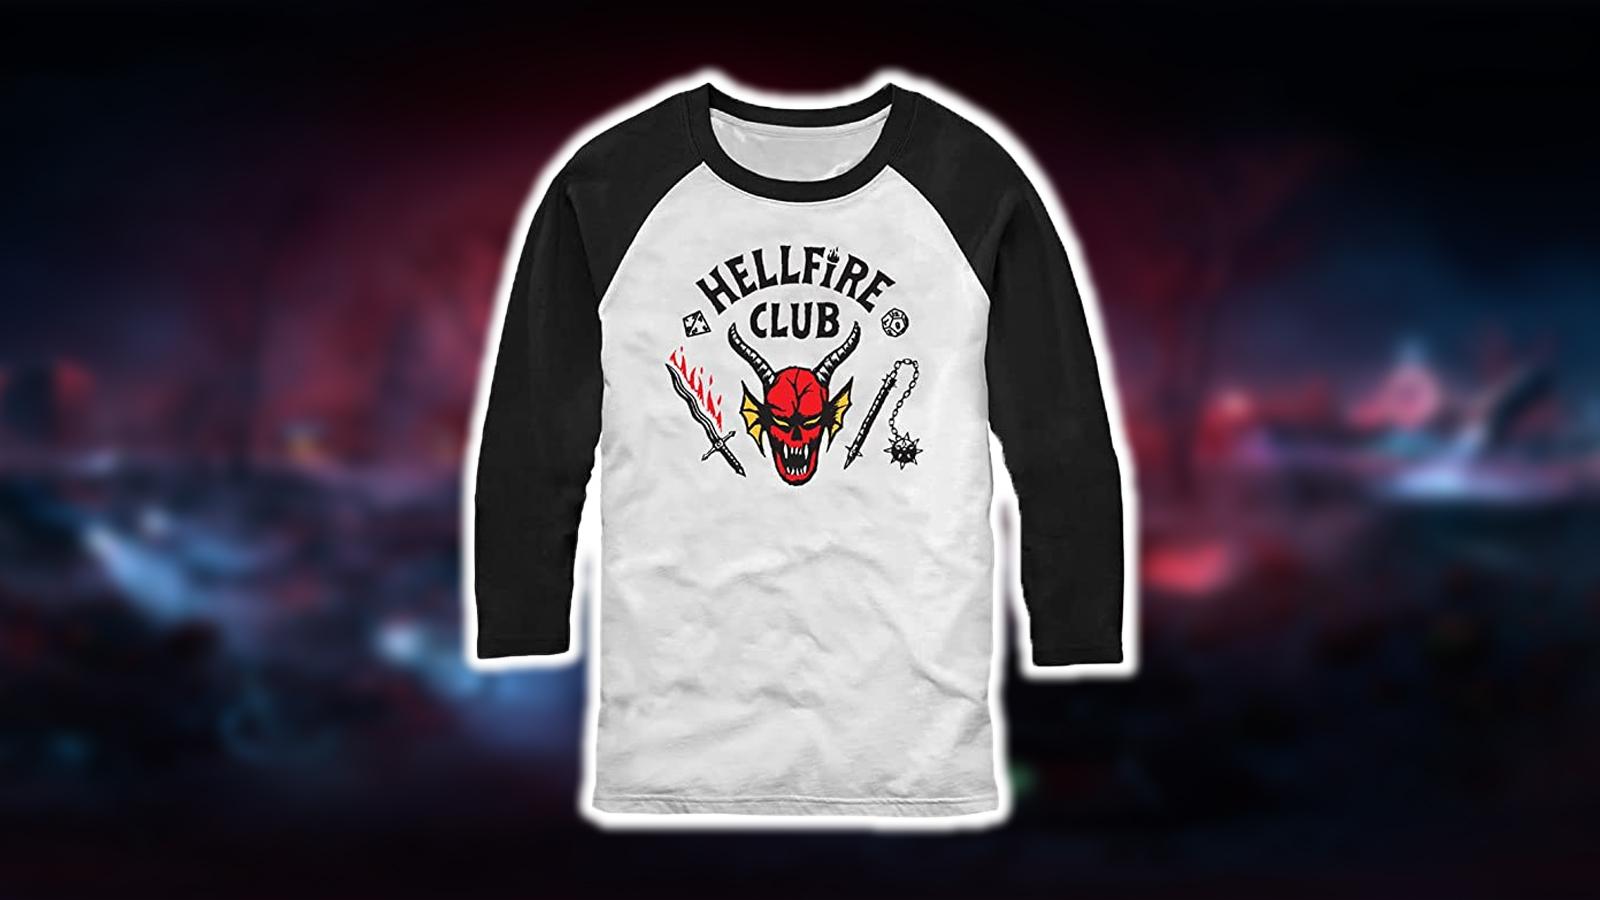 Best Stranger Things holiday merch and gifts 2022: Hellfire Club shirt,  Funko Pops & more - Dexerto